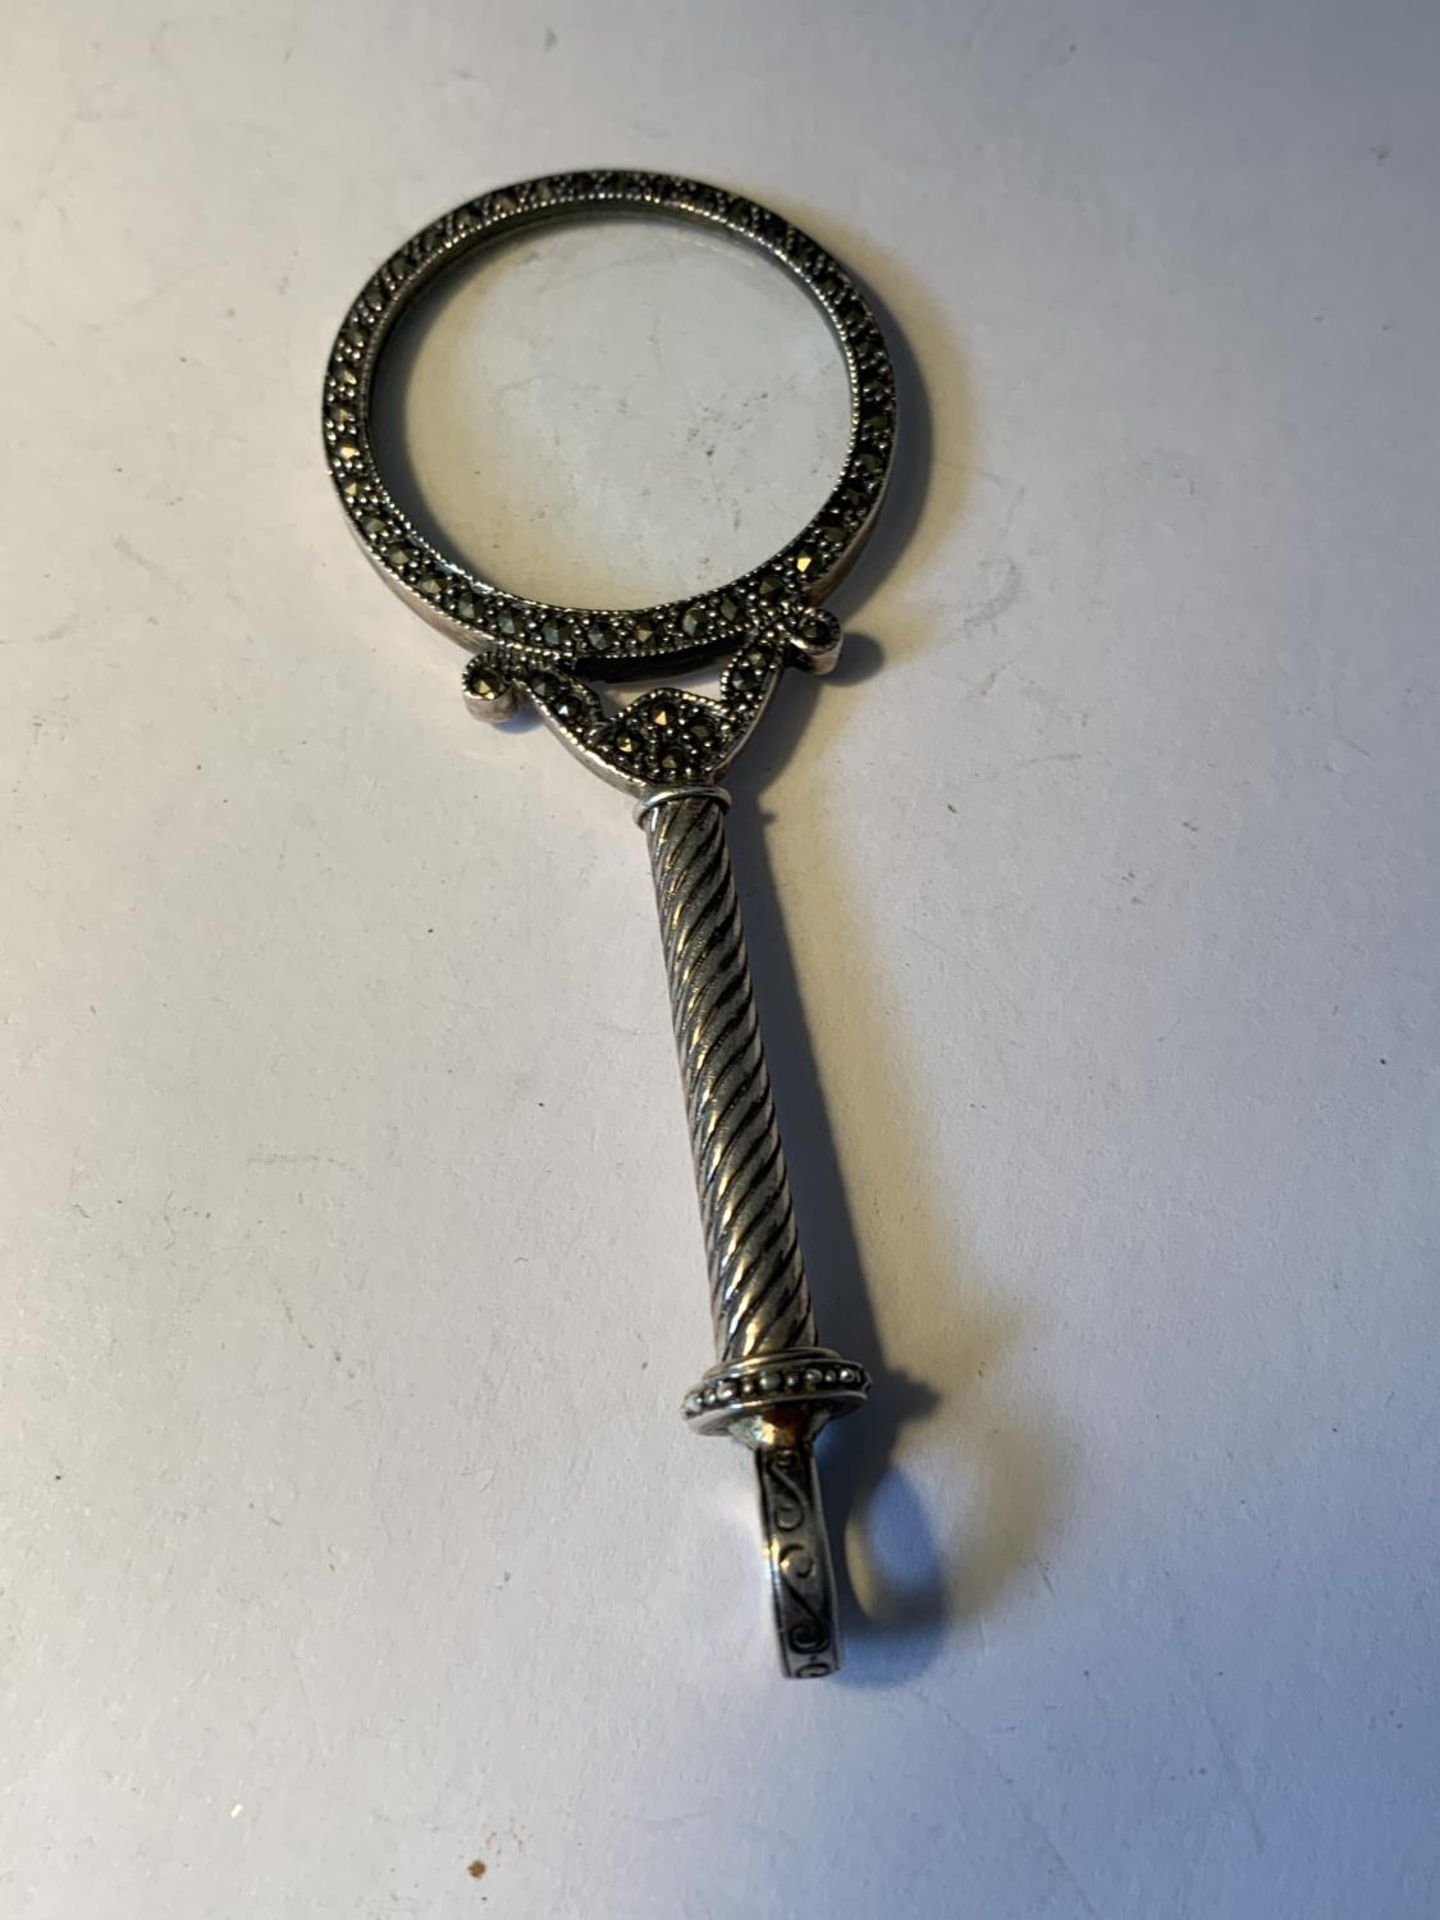 A MARKED 925 SILVER DECORATIVE MAGNIFYING GLASS